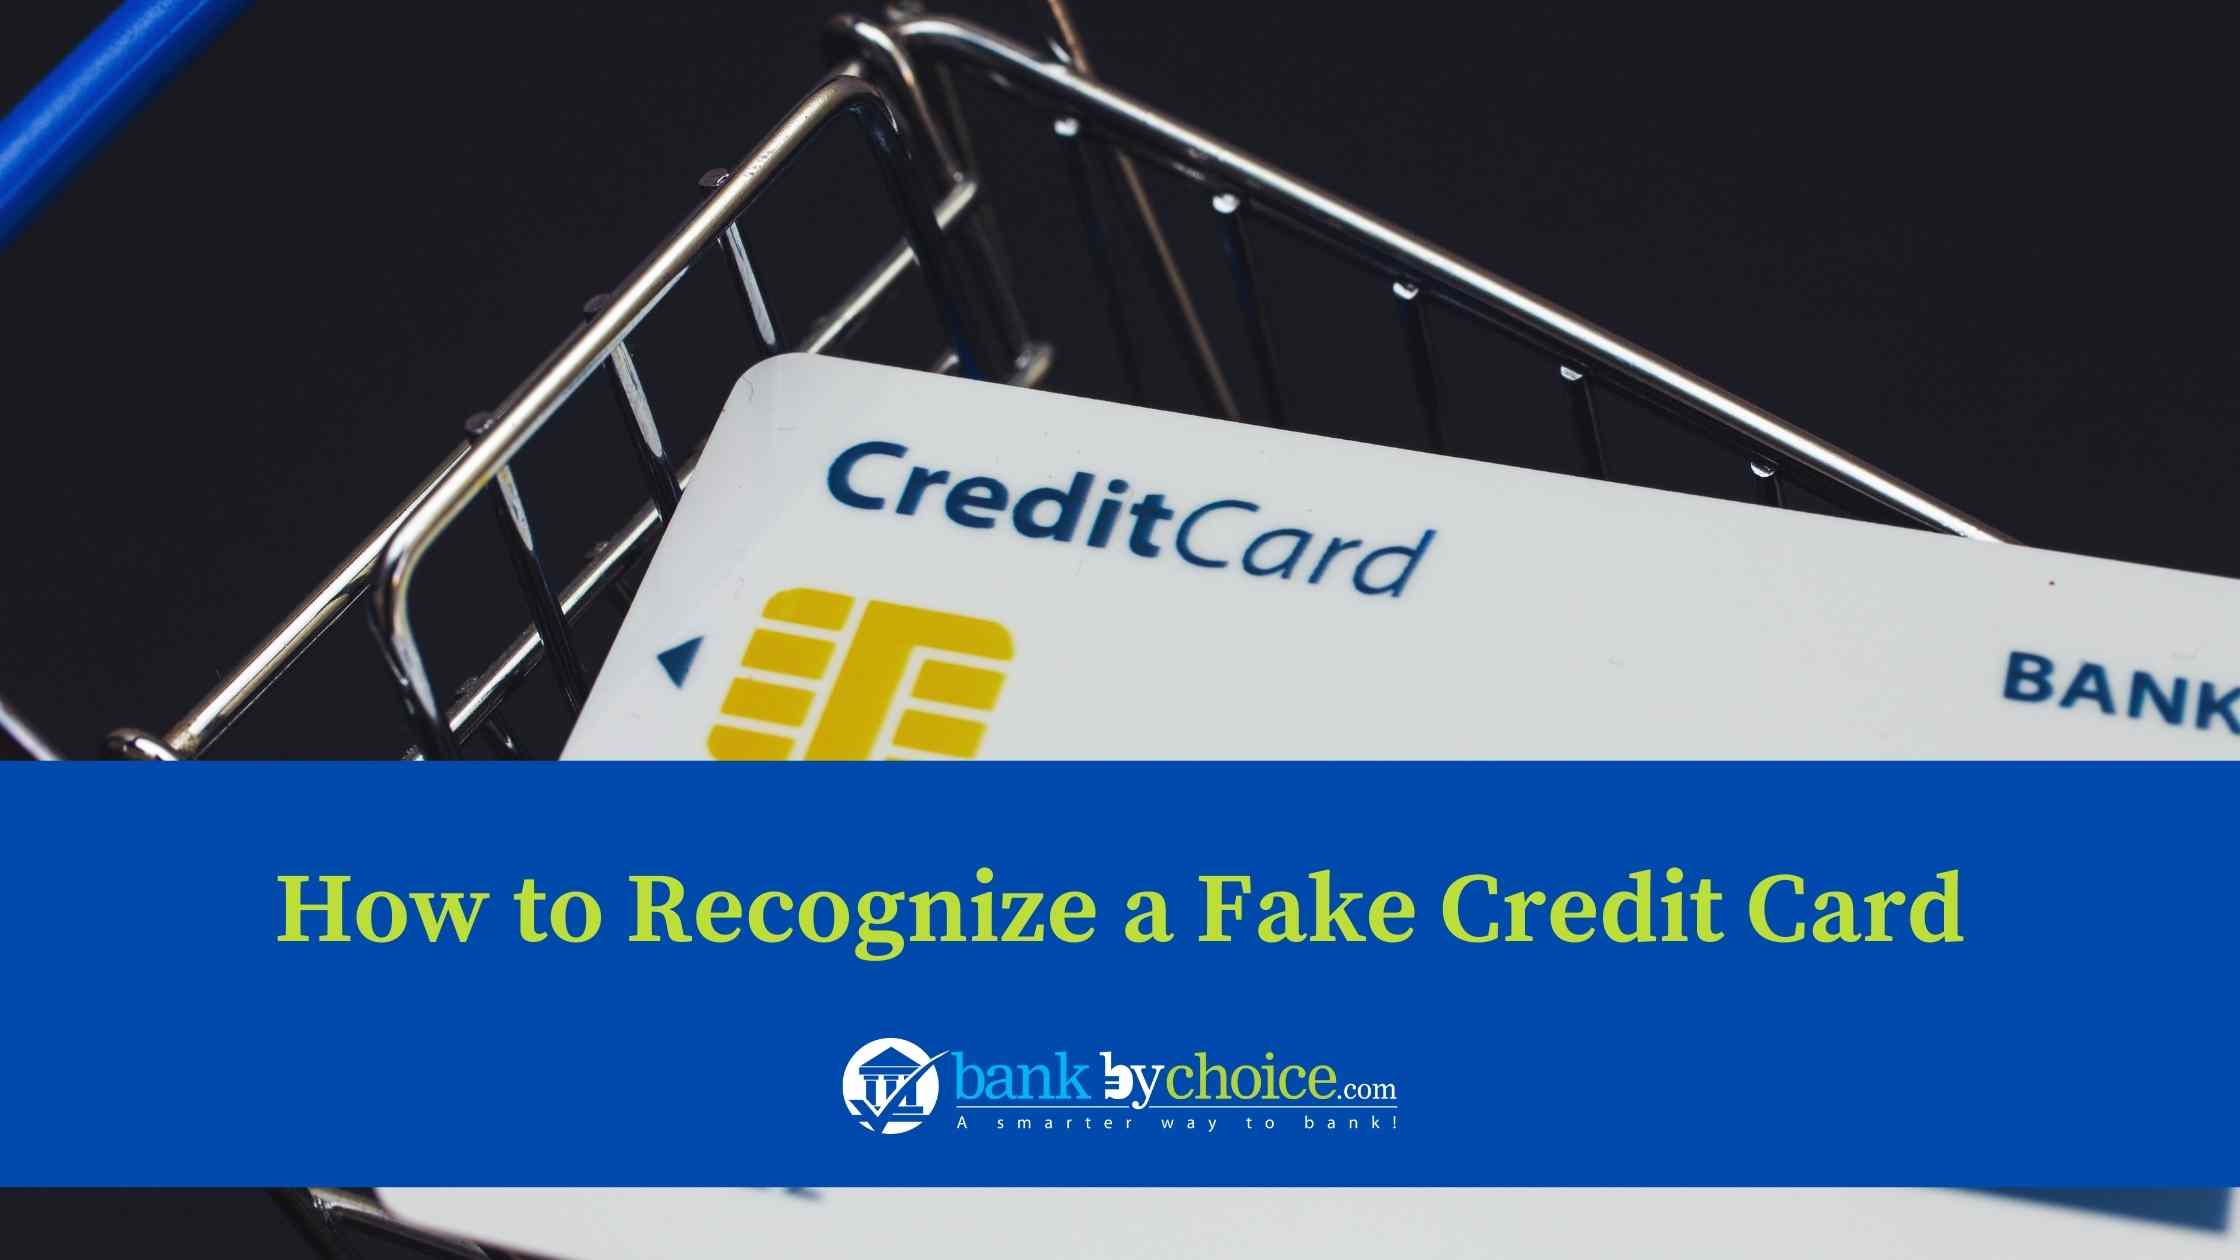 Recognize Fake Credit Card- Bankbychoice